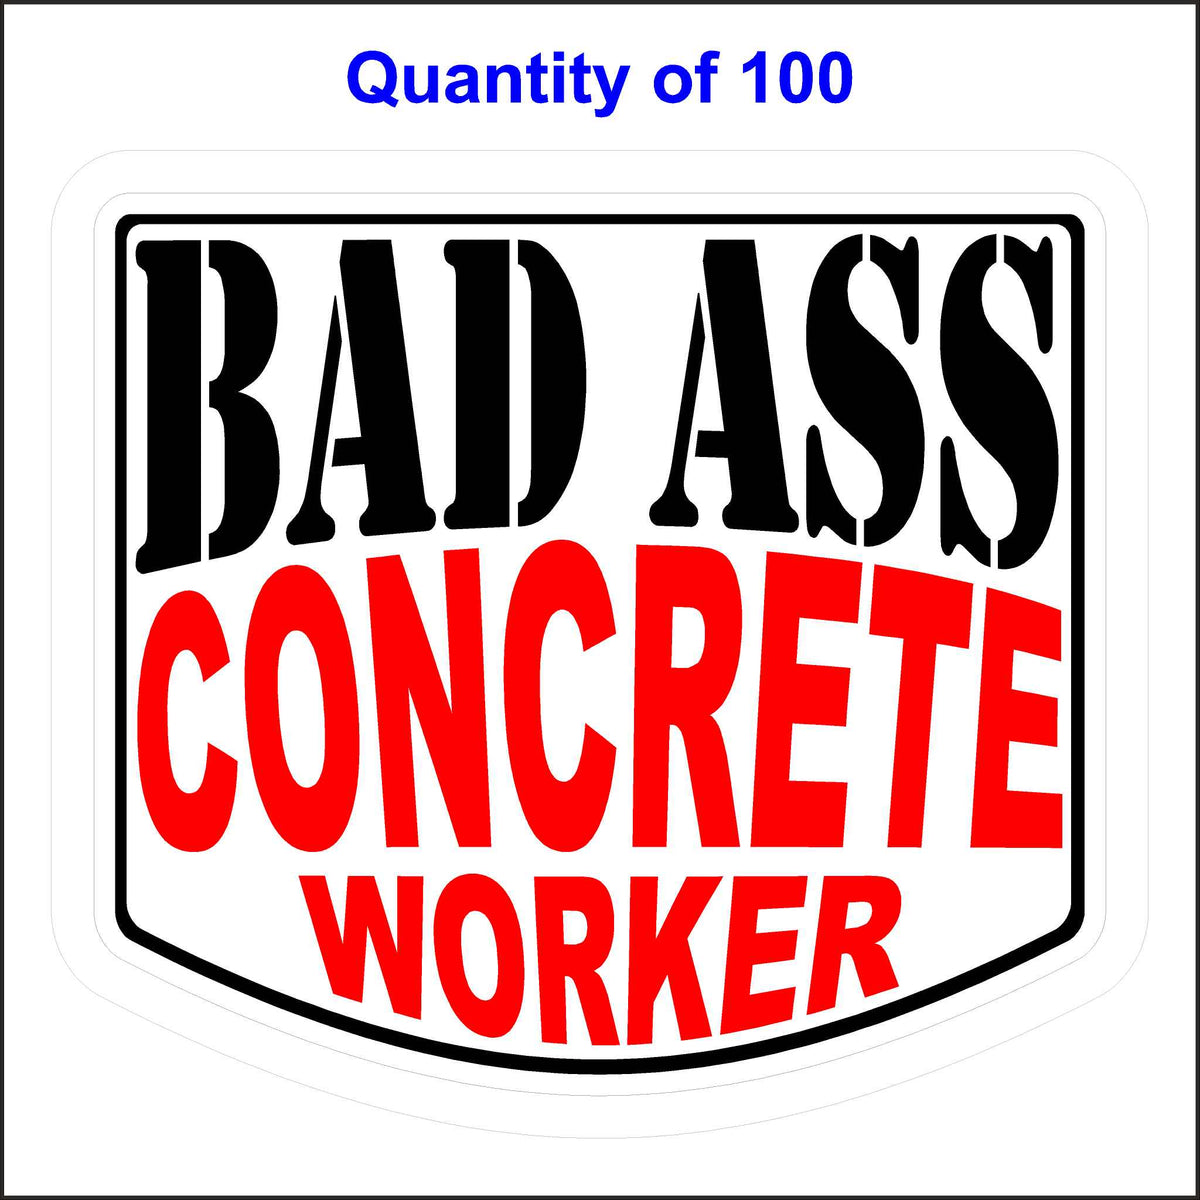 Bad Ass Concrete Worker Stickers 100 Quantity.